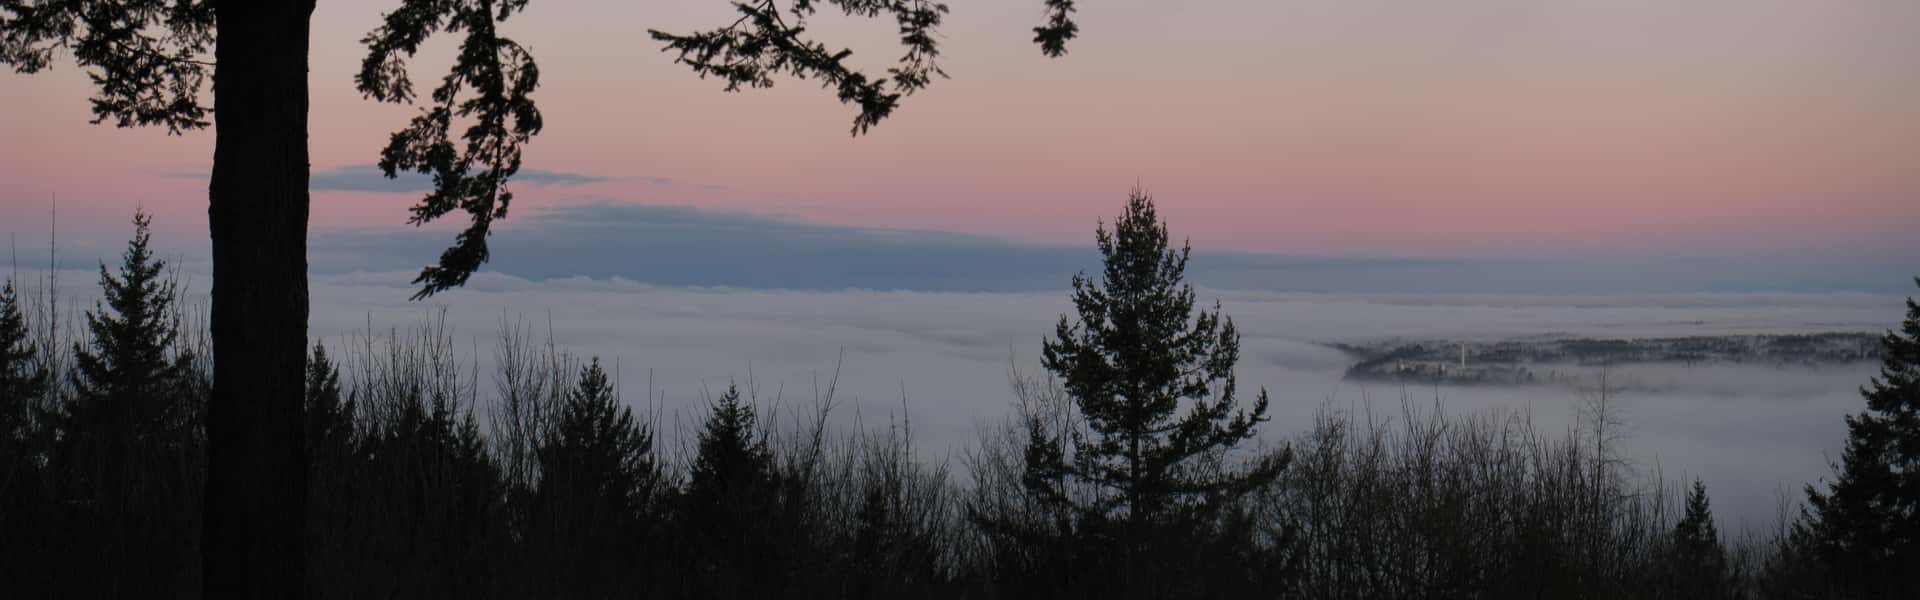 view from Sehome Hill of a blanket of fog covering Bellingham Bay